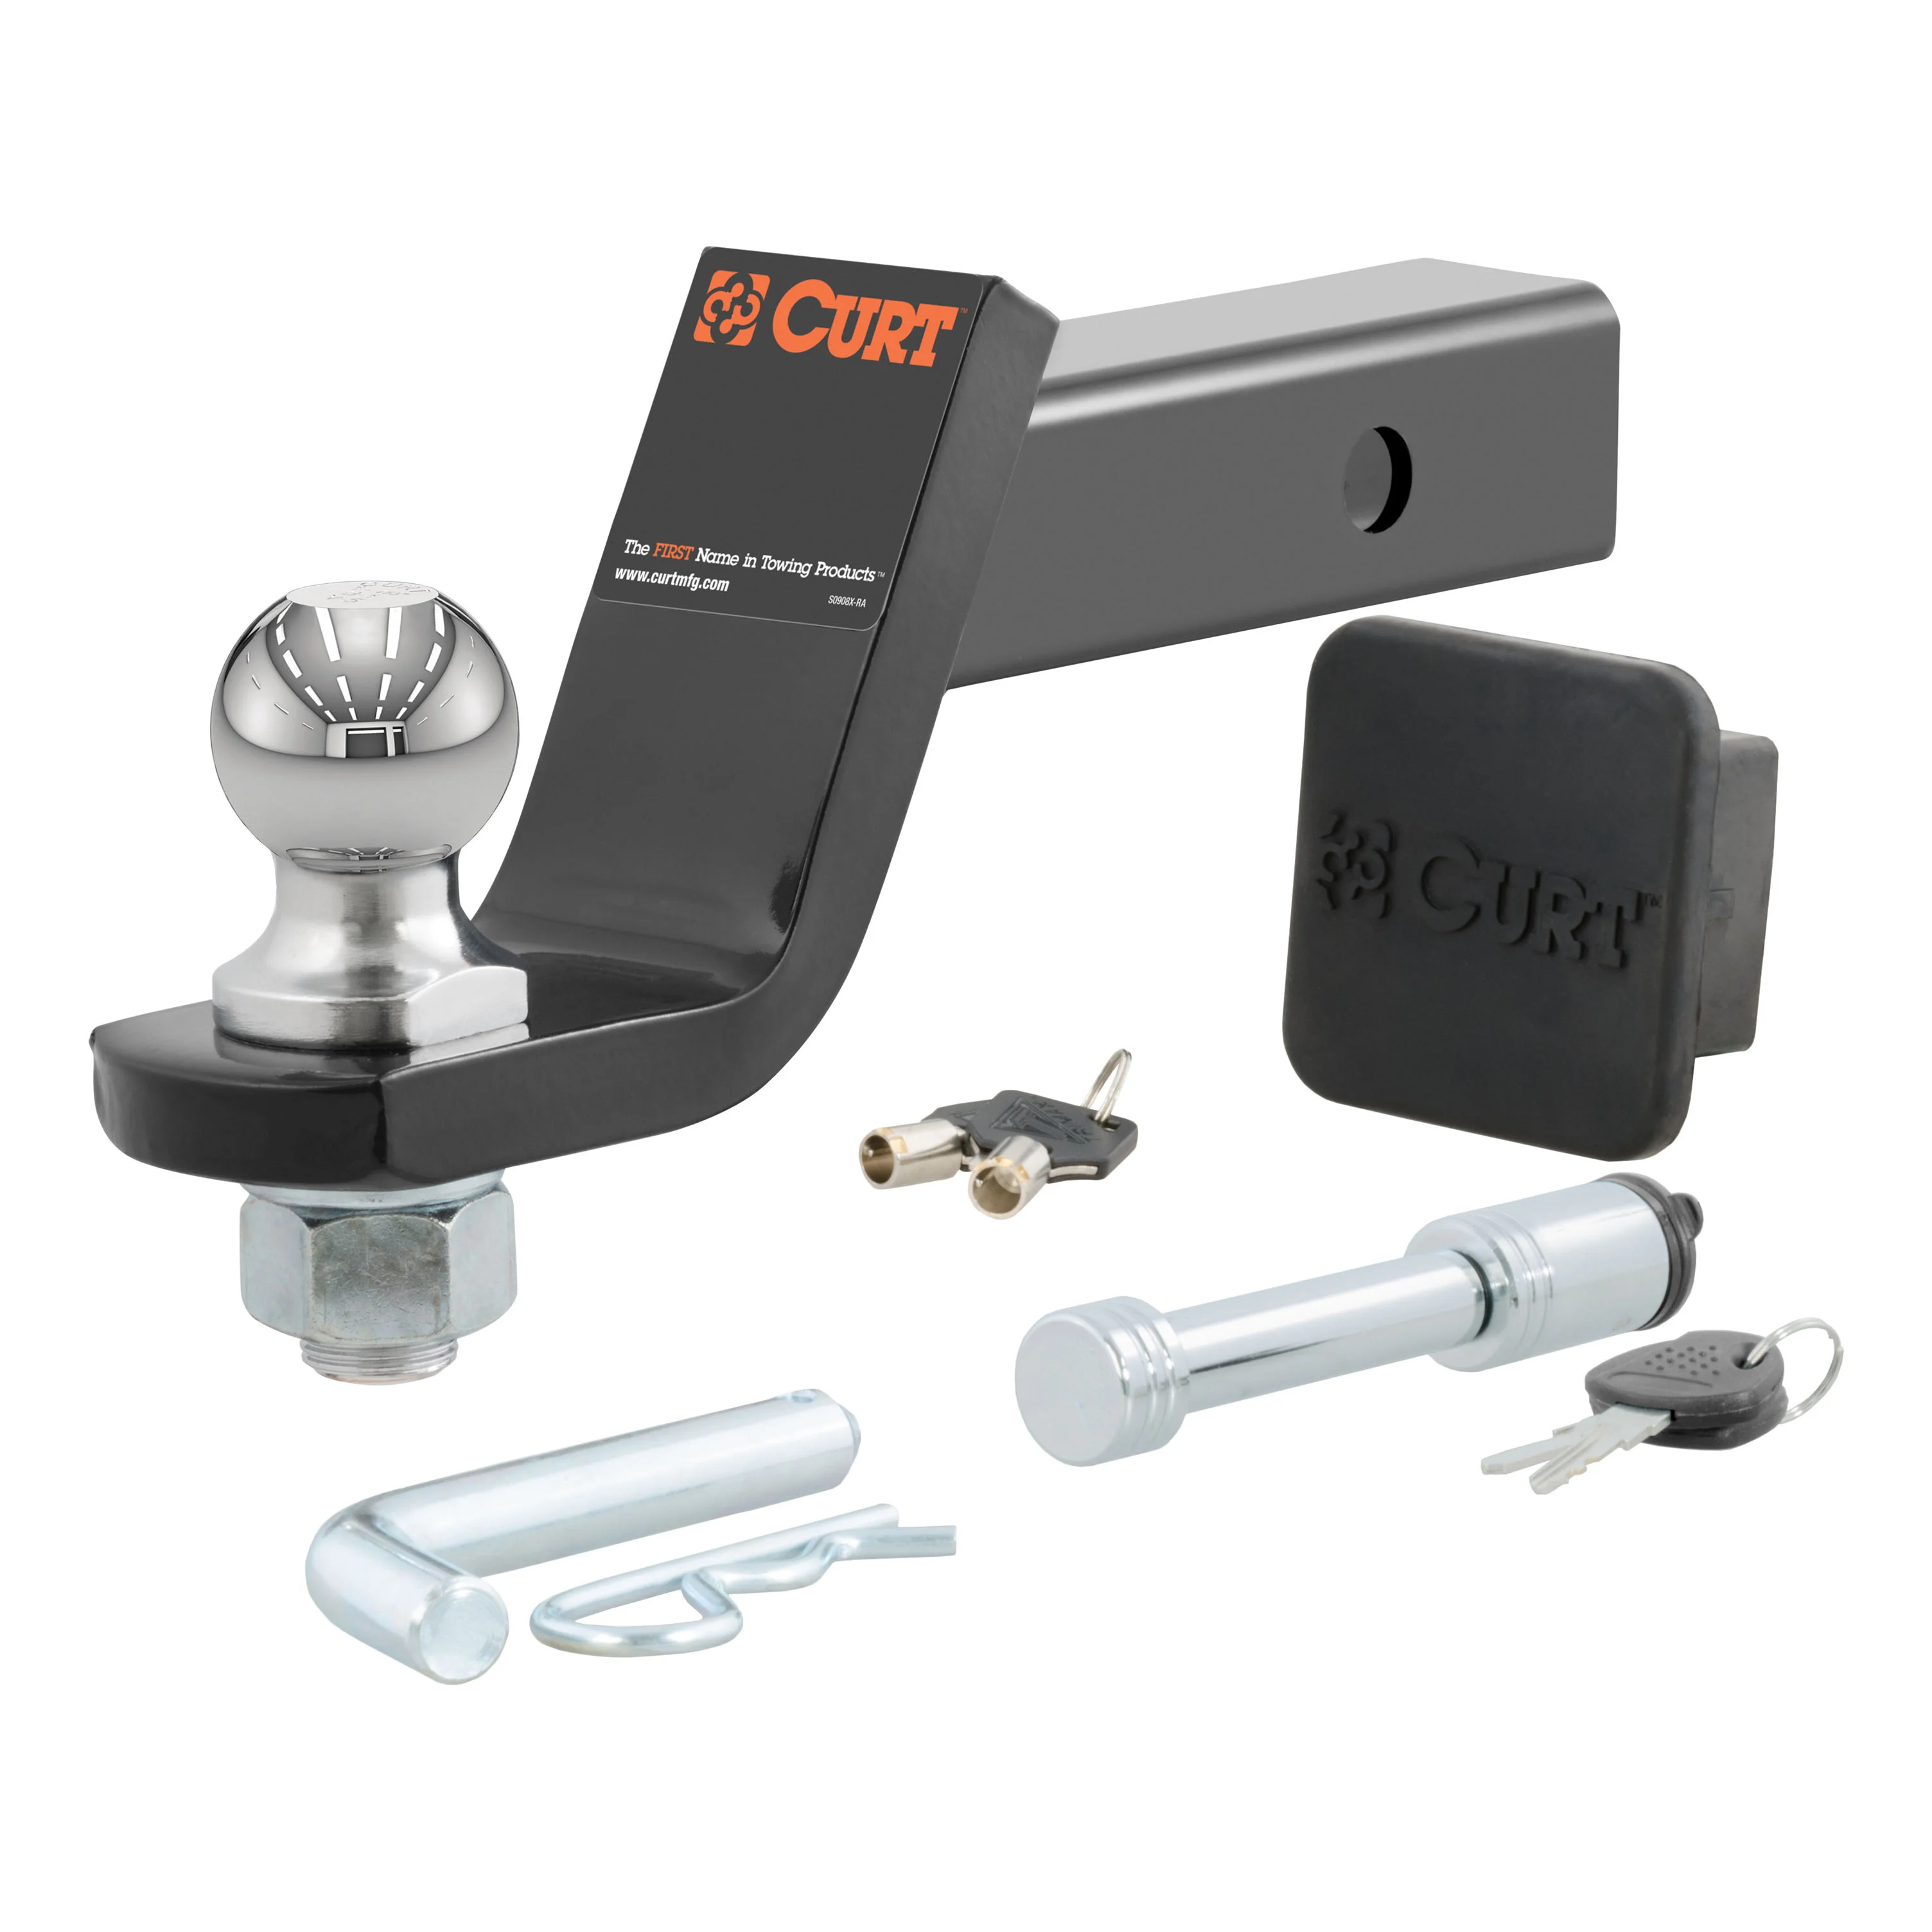 OEM 2012 Dodge Durango Curt Towing Starter Kit 2-inch ball, 2-inch shank with 4-inch drop (Part #68628506AA)